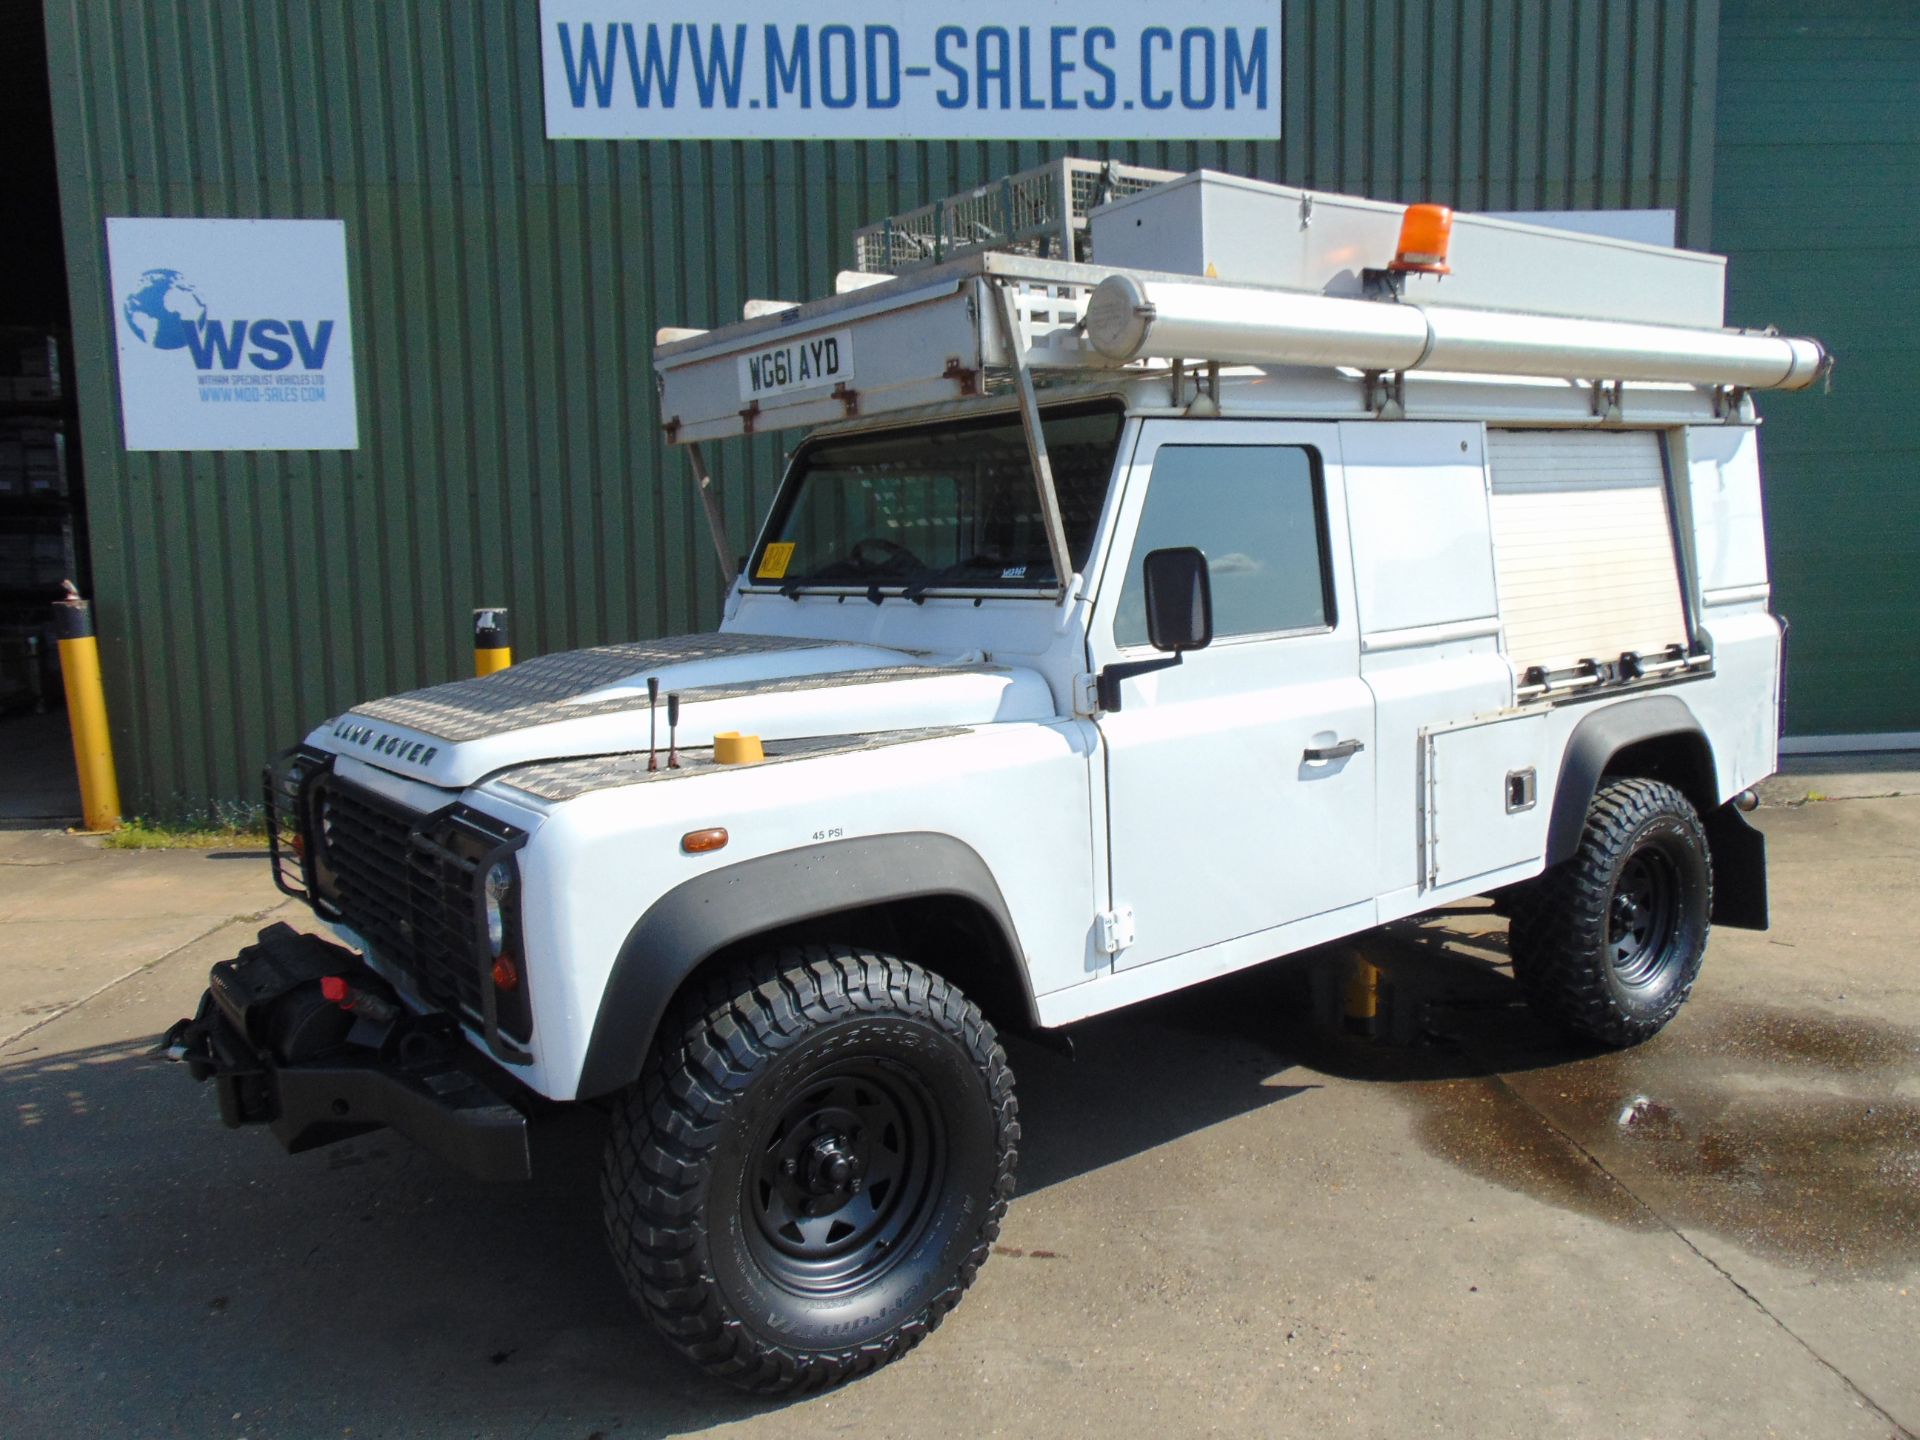 2011 Land Rover Defender 110 Puma hardtop 4x4 Utility vehicle (mobile workshop) with hydraulic winch - Image 2 of 53